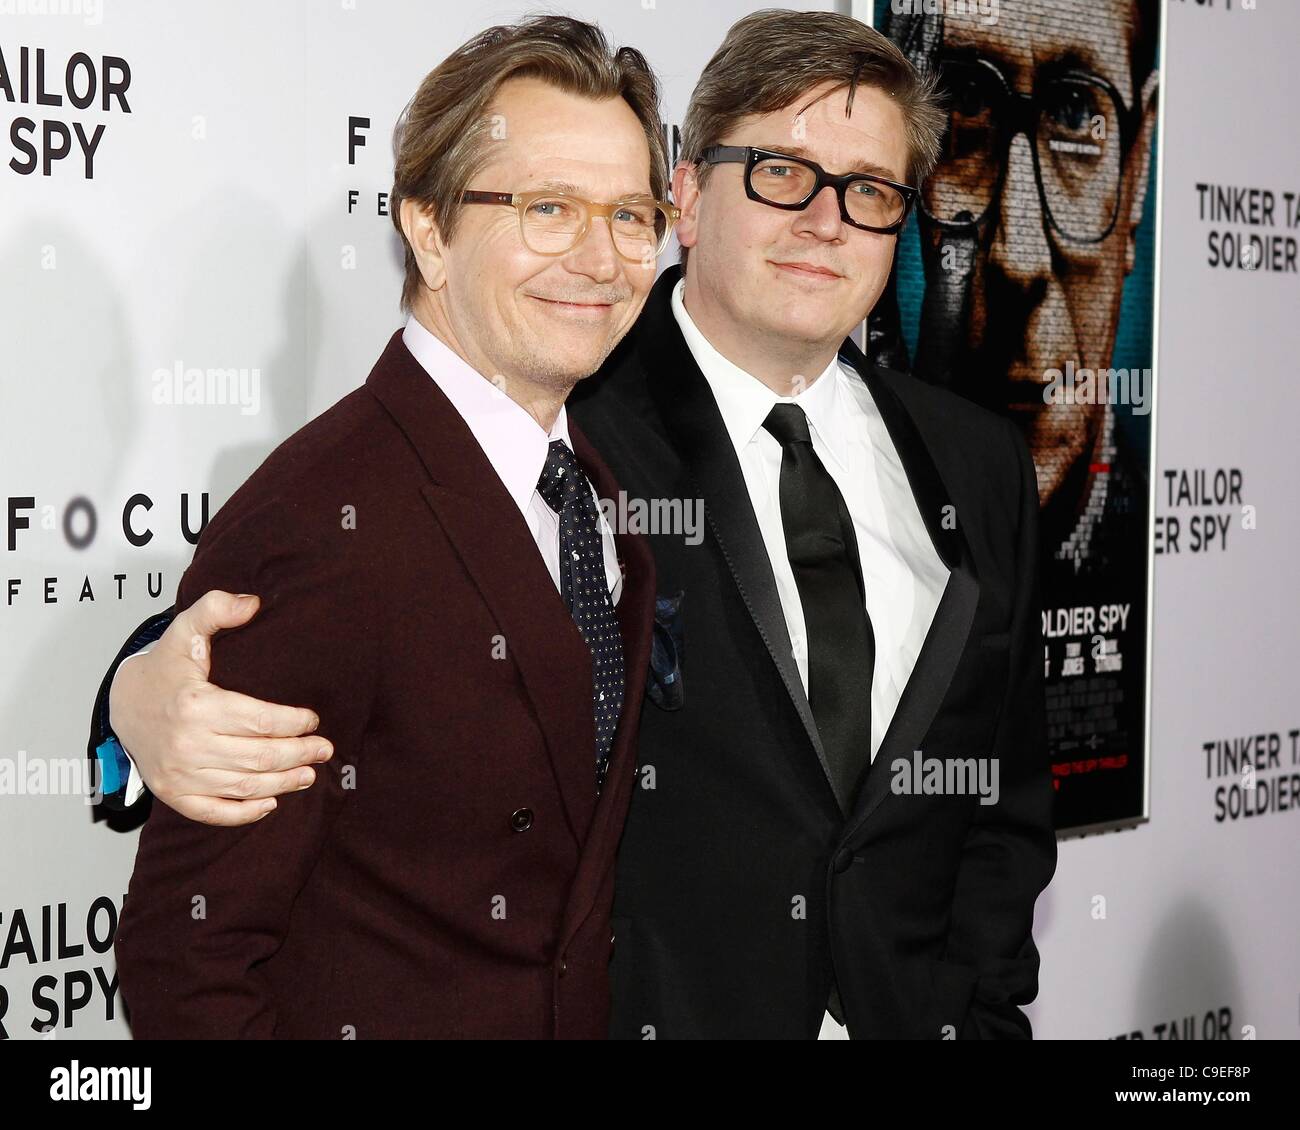 Gary Oldman, Tomas Alfredson at arrivals for TINKER, TAILOR, SOLDIER ...